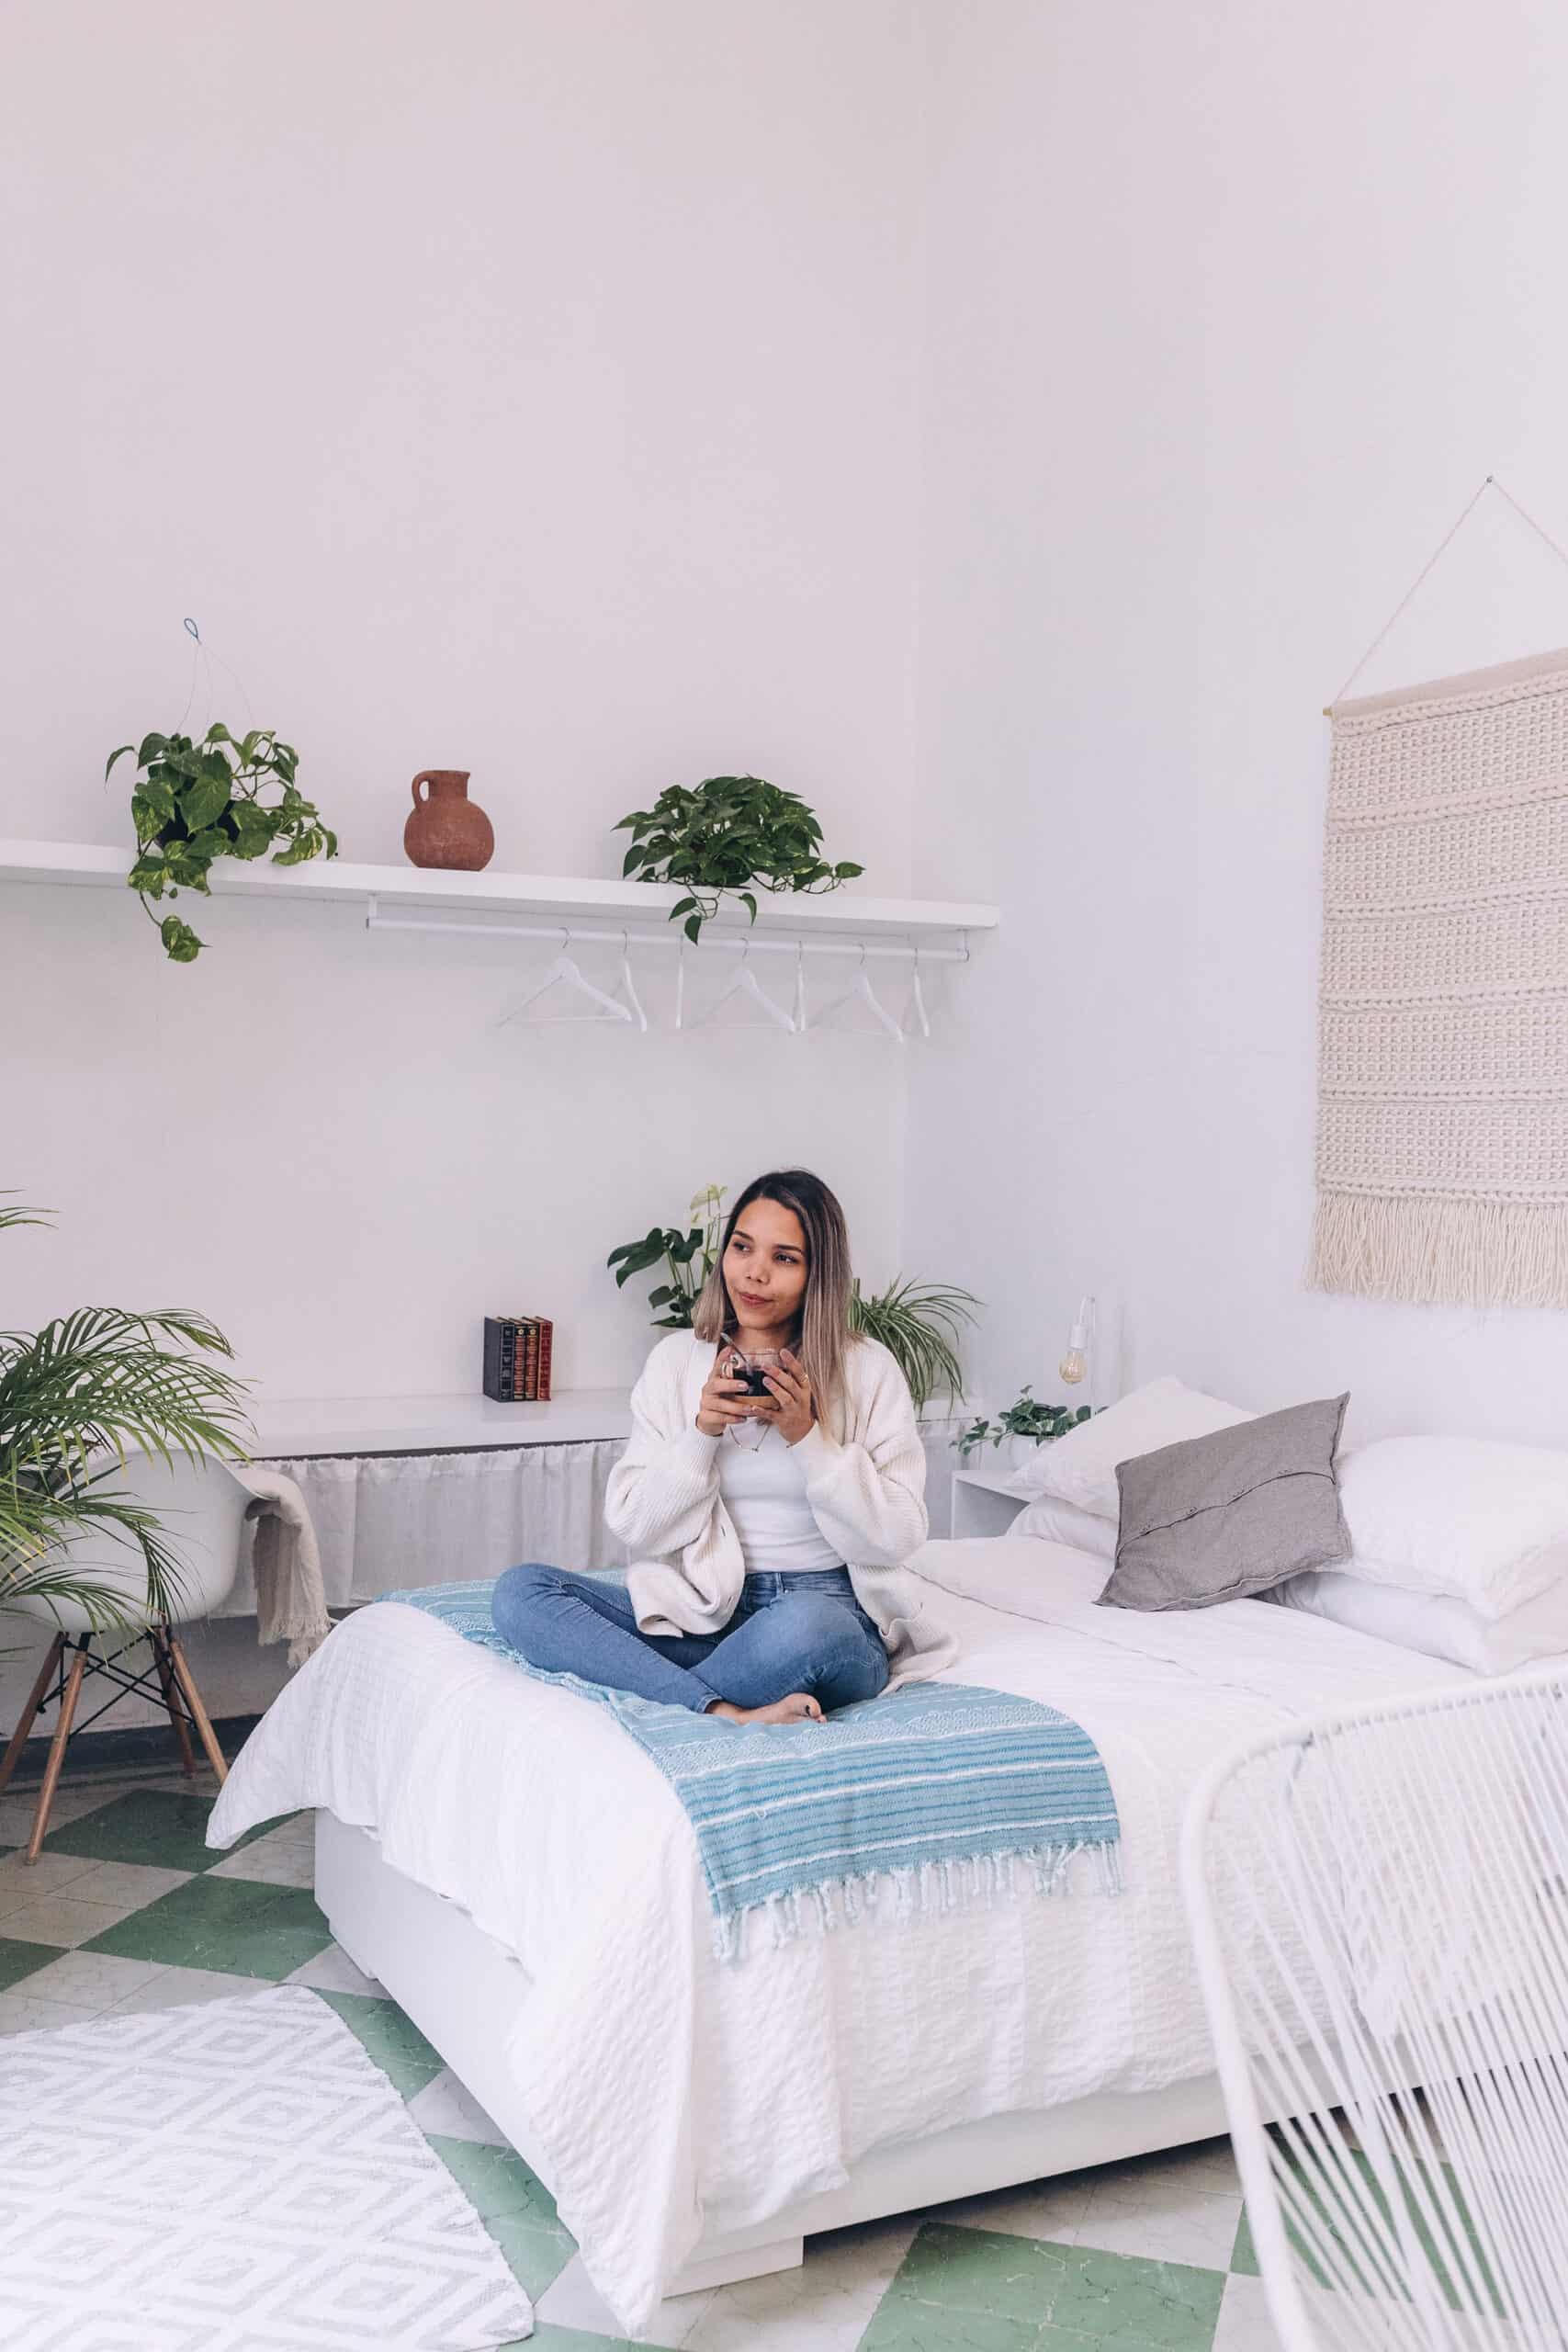 A girl sitting on her bed drinking tea. The bed has white sheets and there are plants on book shelves behind her.